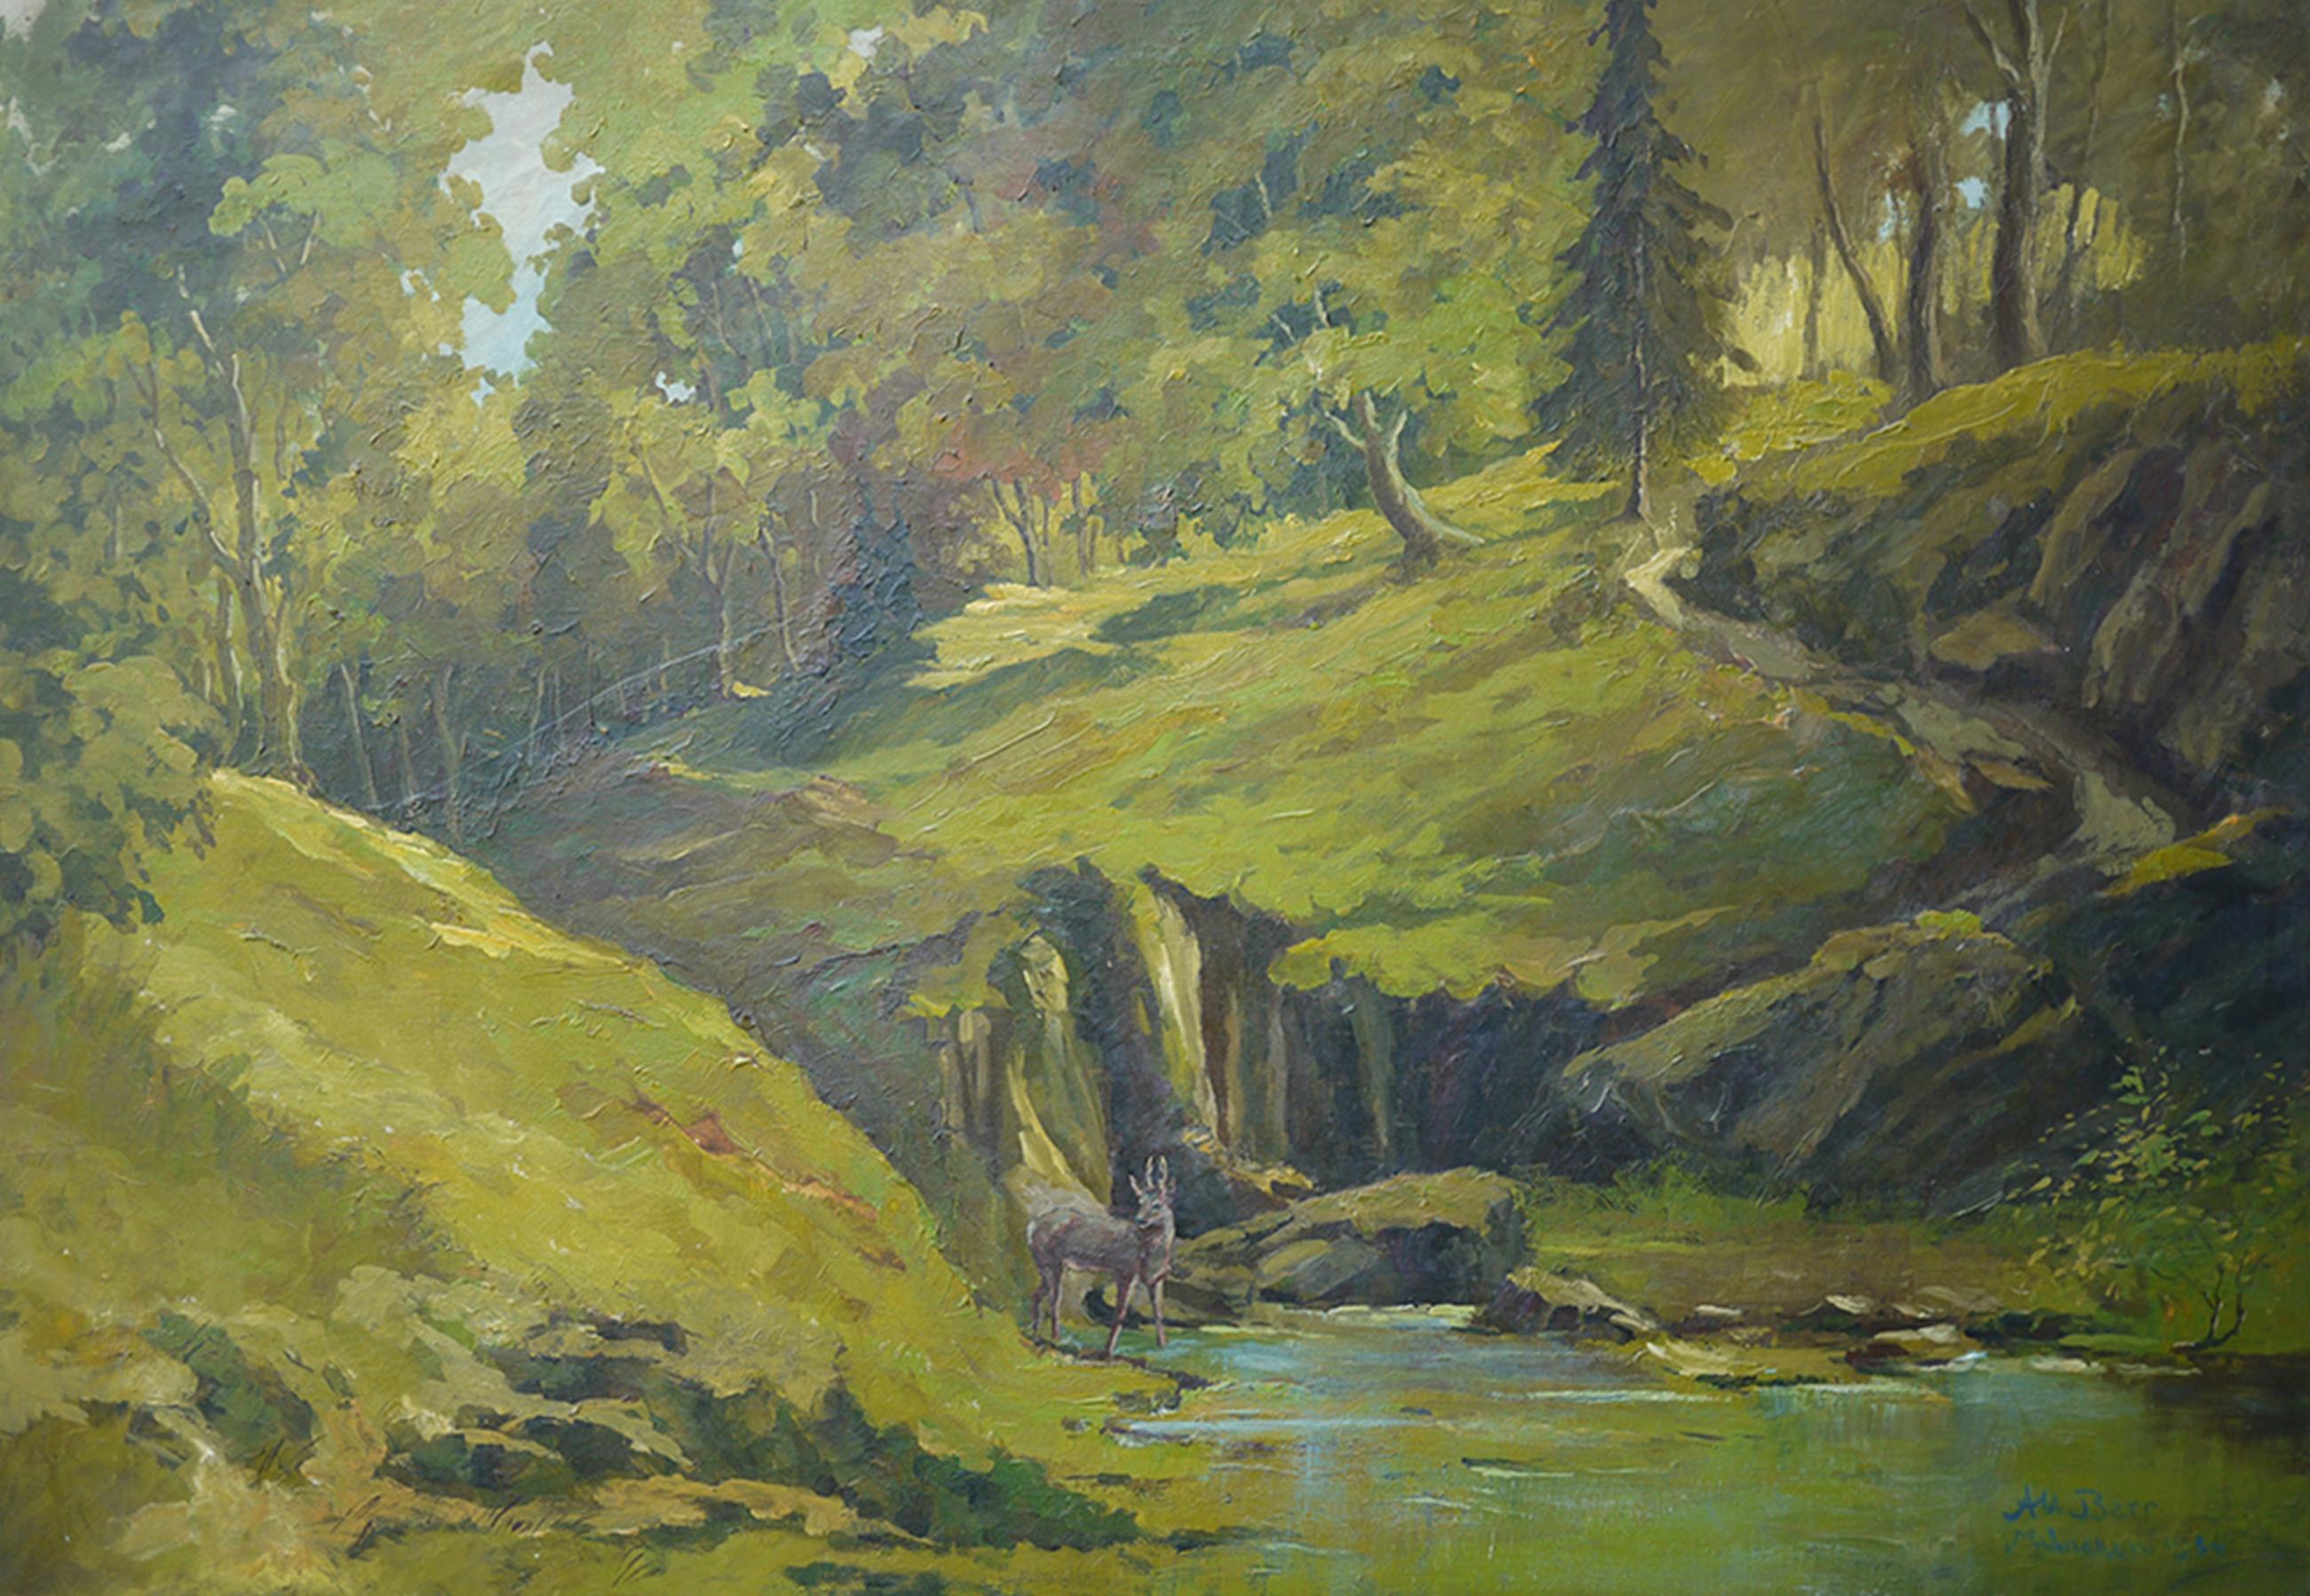 Roe deer in the wood - forest with stream

Measures: cm70 x cm100 (without frame) - oil on canvas - 1934
Painted by broad brushstrokes rich in material, with warm and well-balanced colors.

Albert Berr, painter, violinist and merchant, active